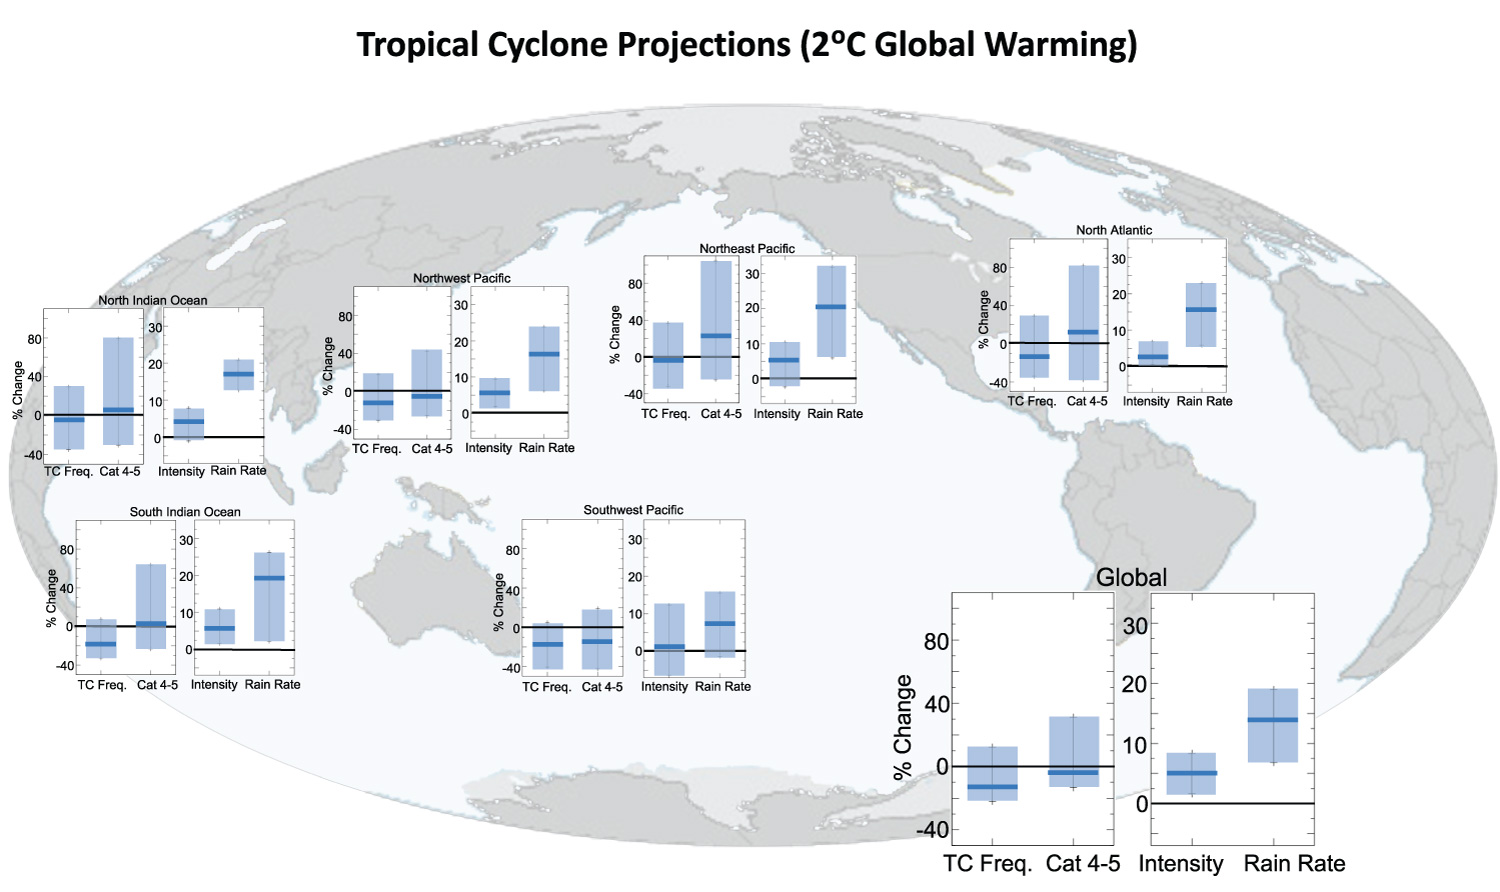 Changes in tropical cyclones under a +2°C global warming